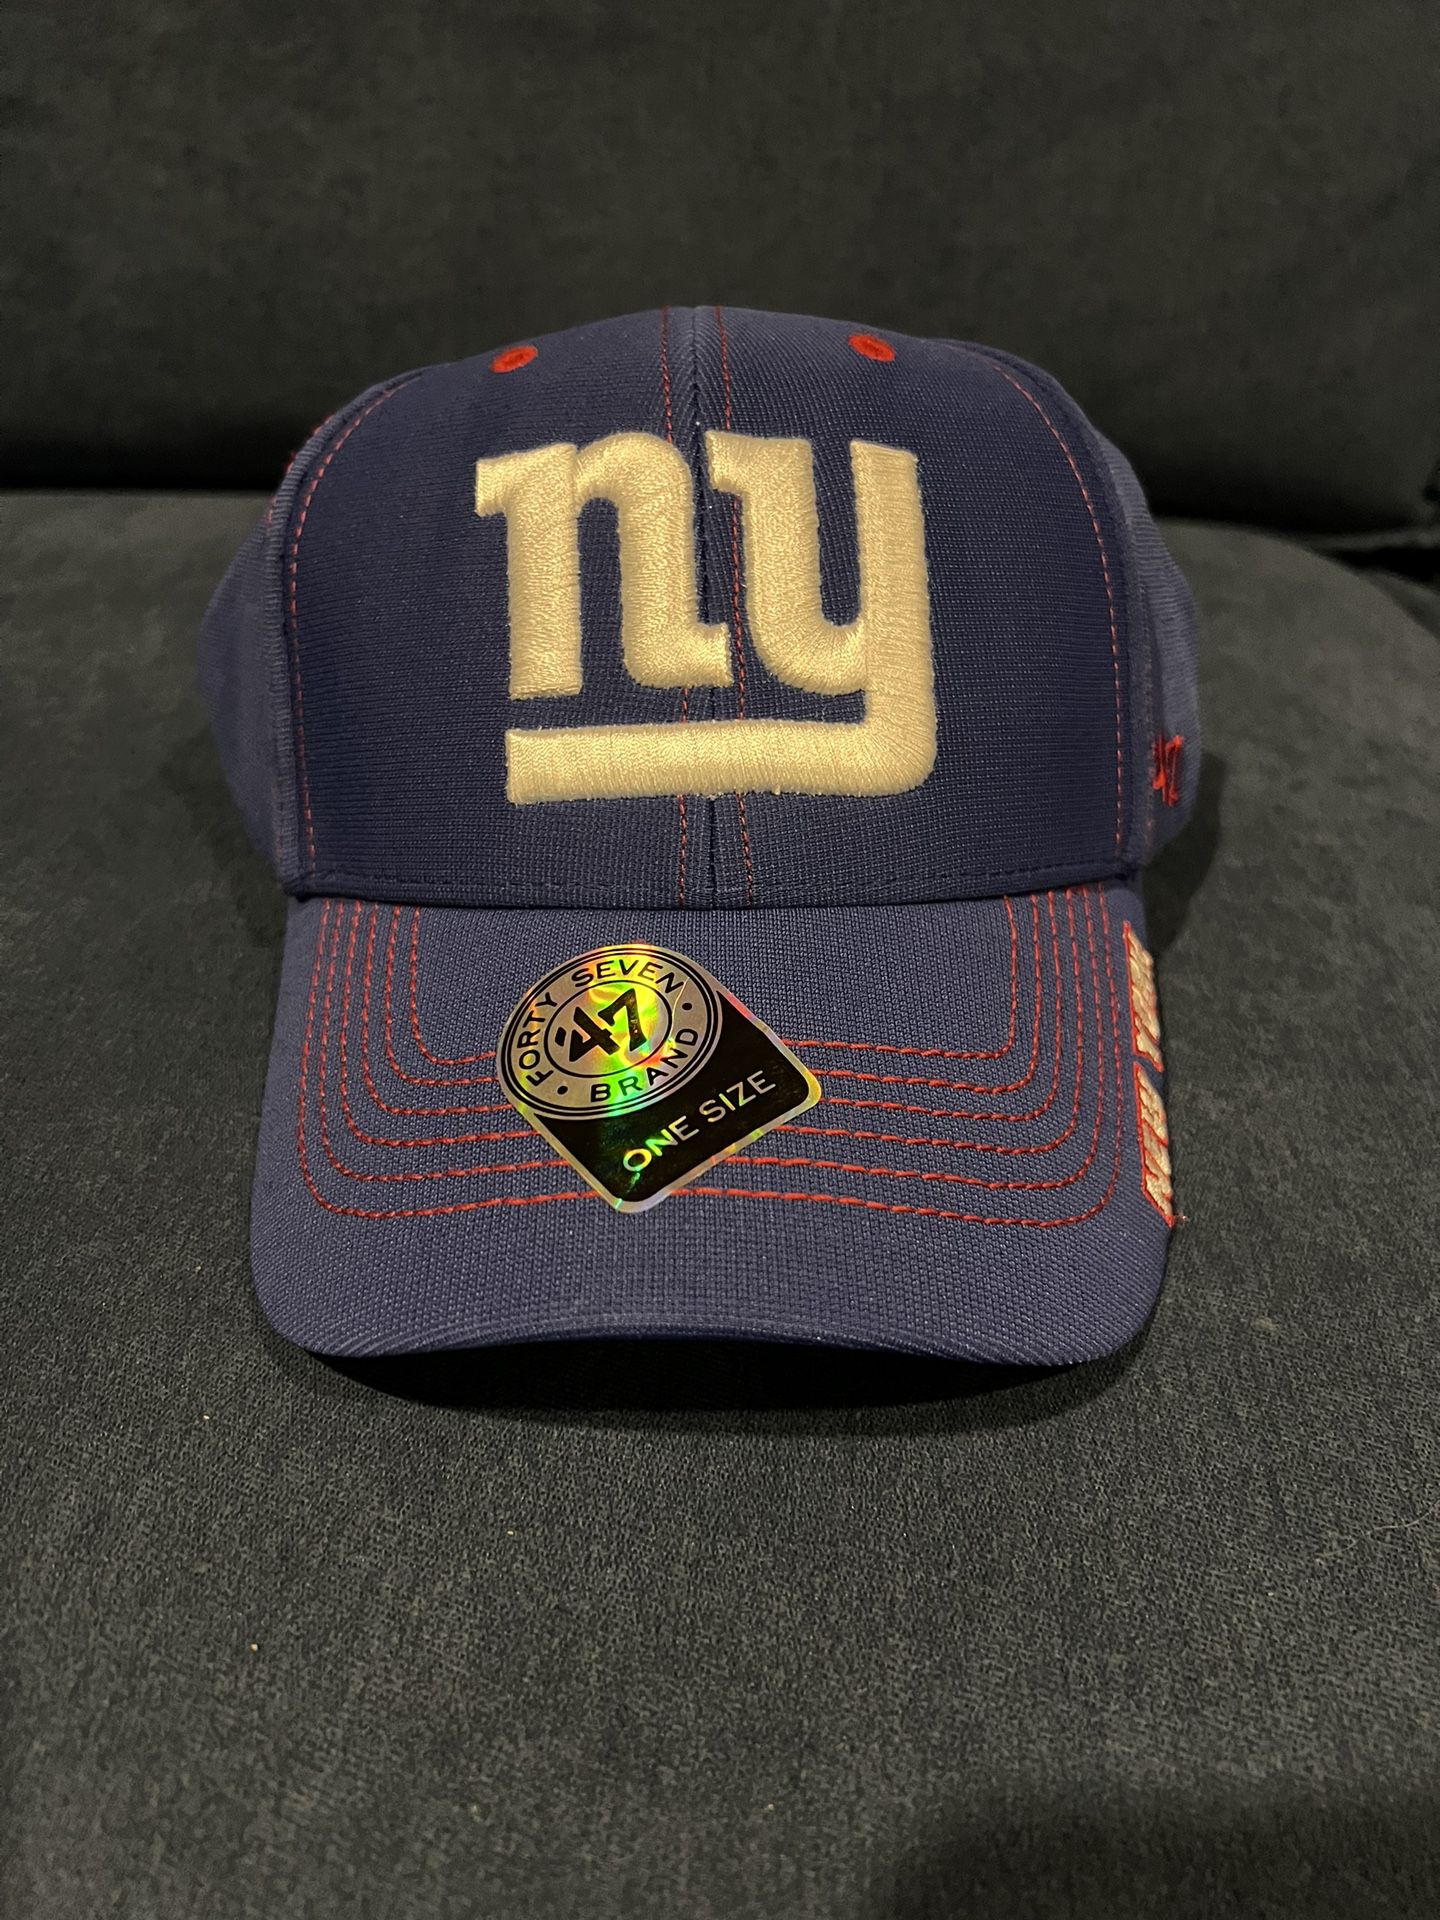 New York Giants Cap/Hat Blue With Red Accents With Tags 